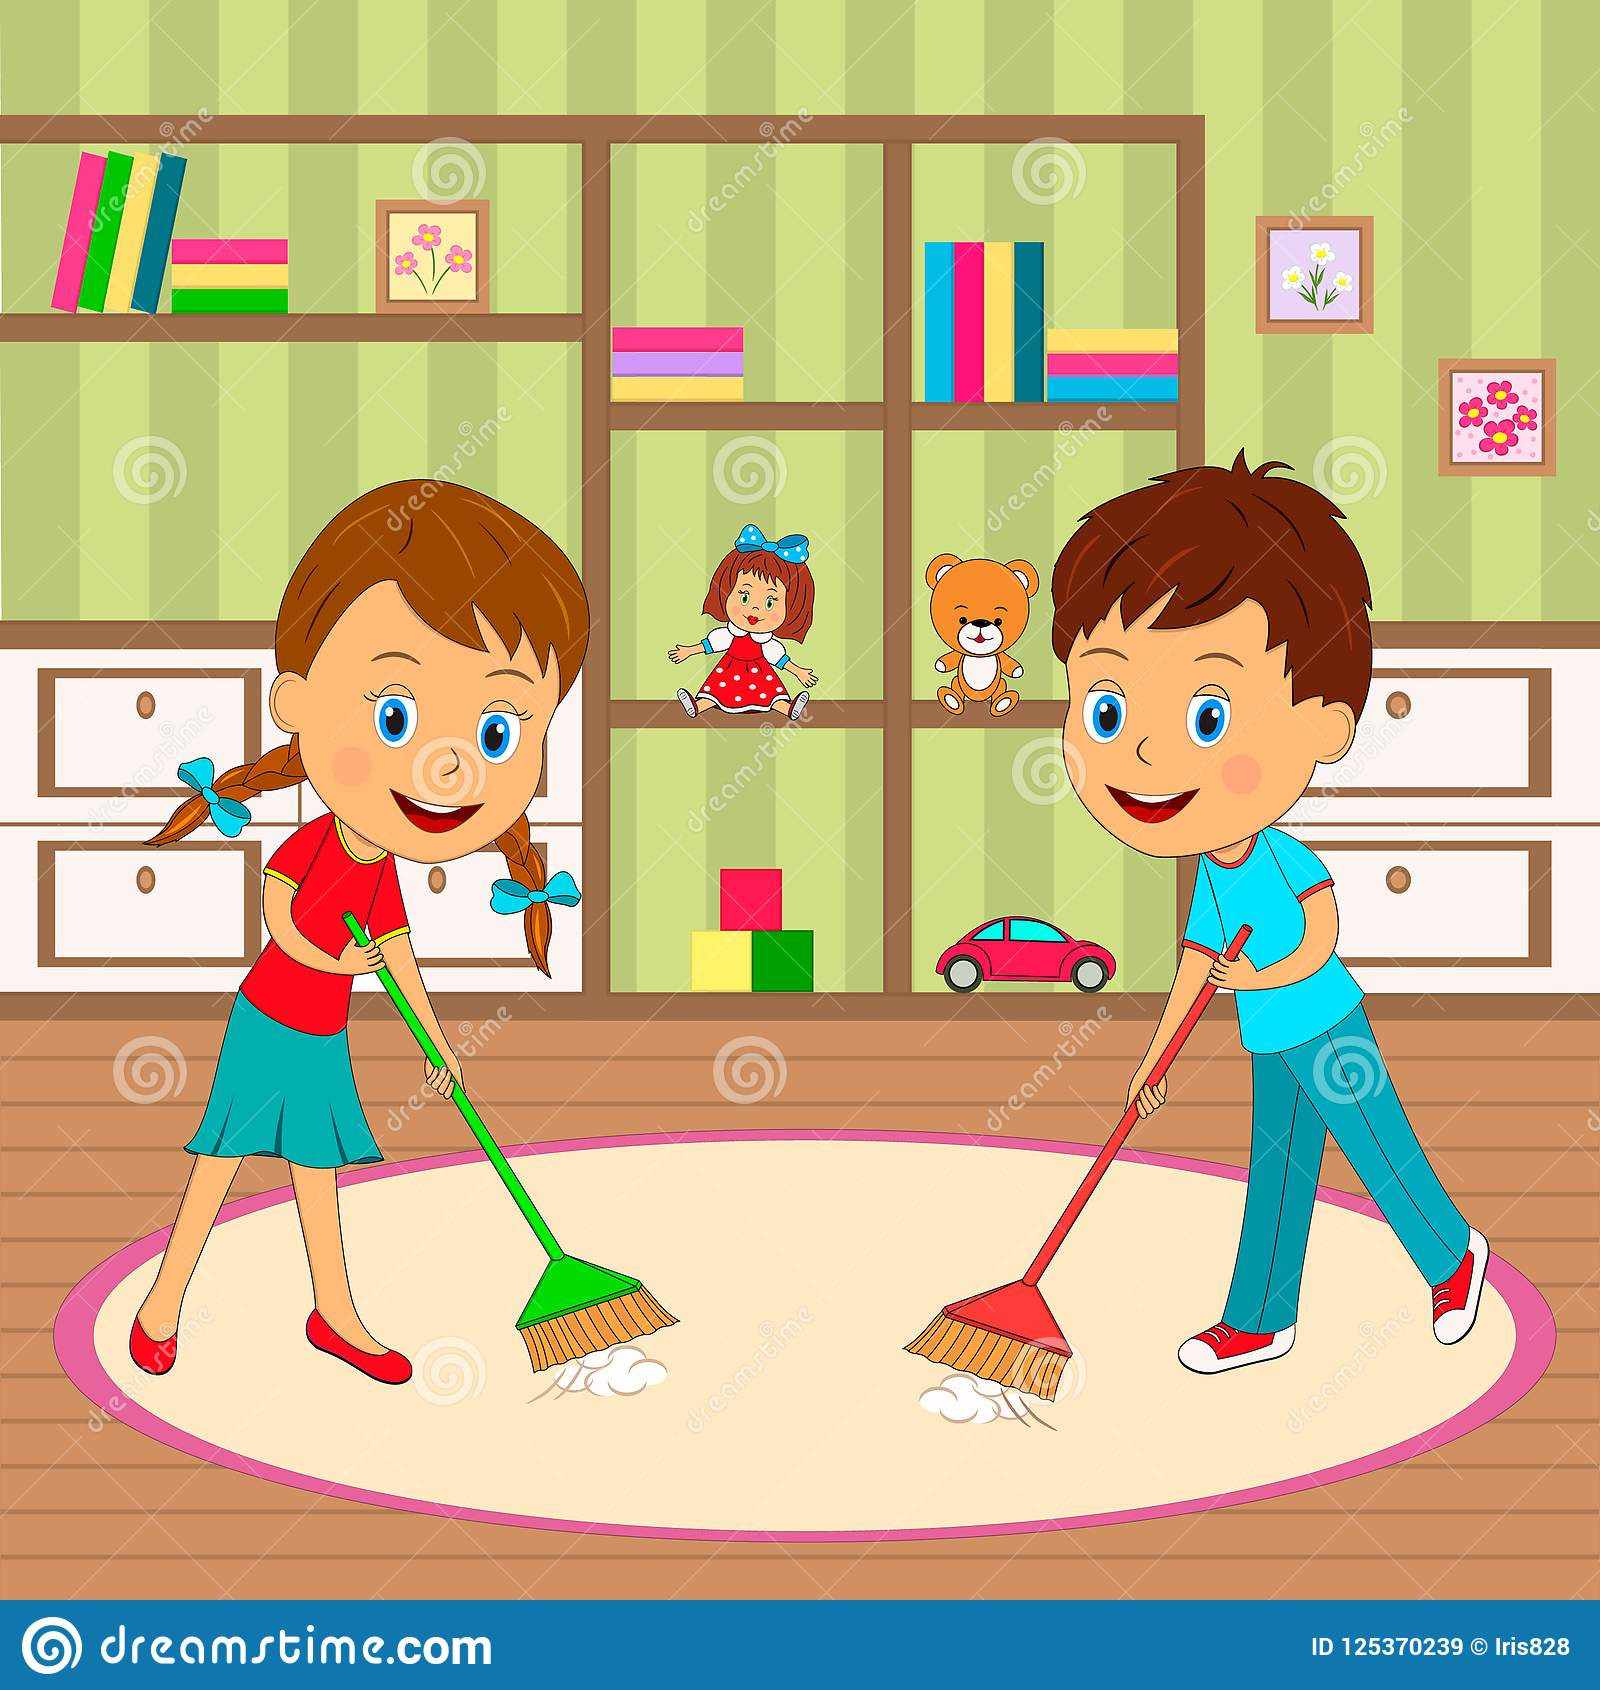 Kids Clean Room Clipart
 Boy And Girl Are Cleaning Room Stock Vector Illustration